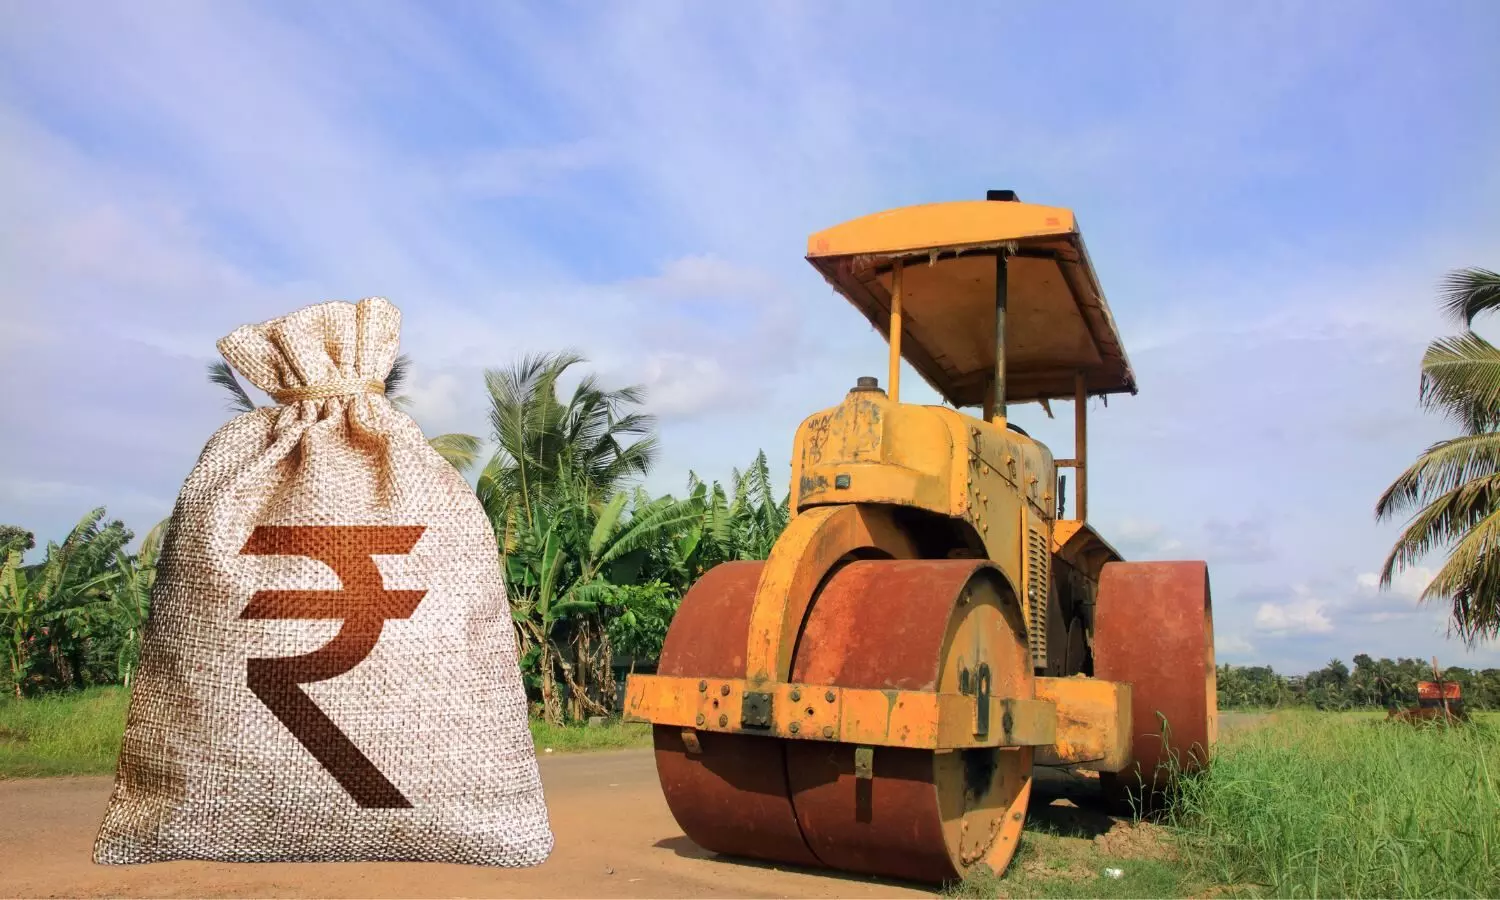 Rupee sack and a Road-Roller